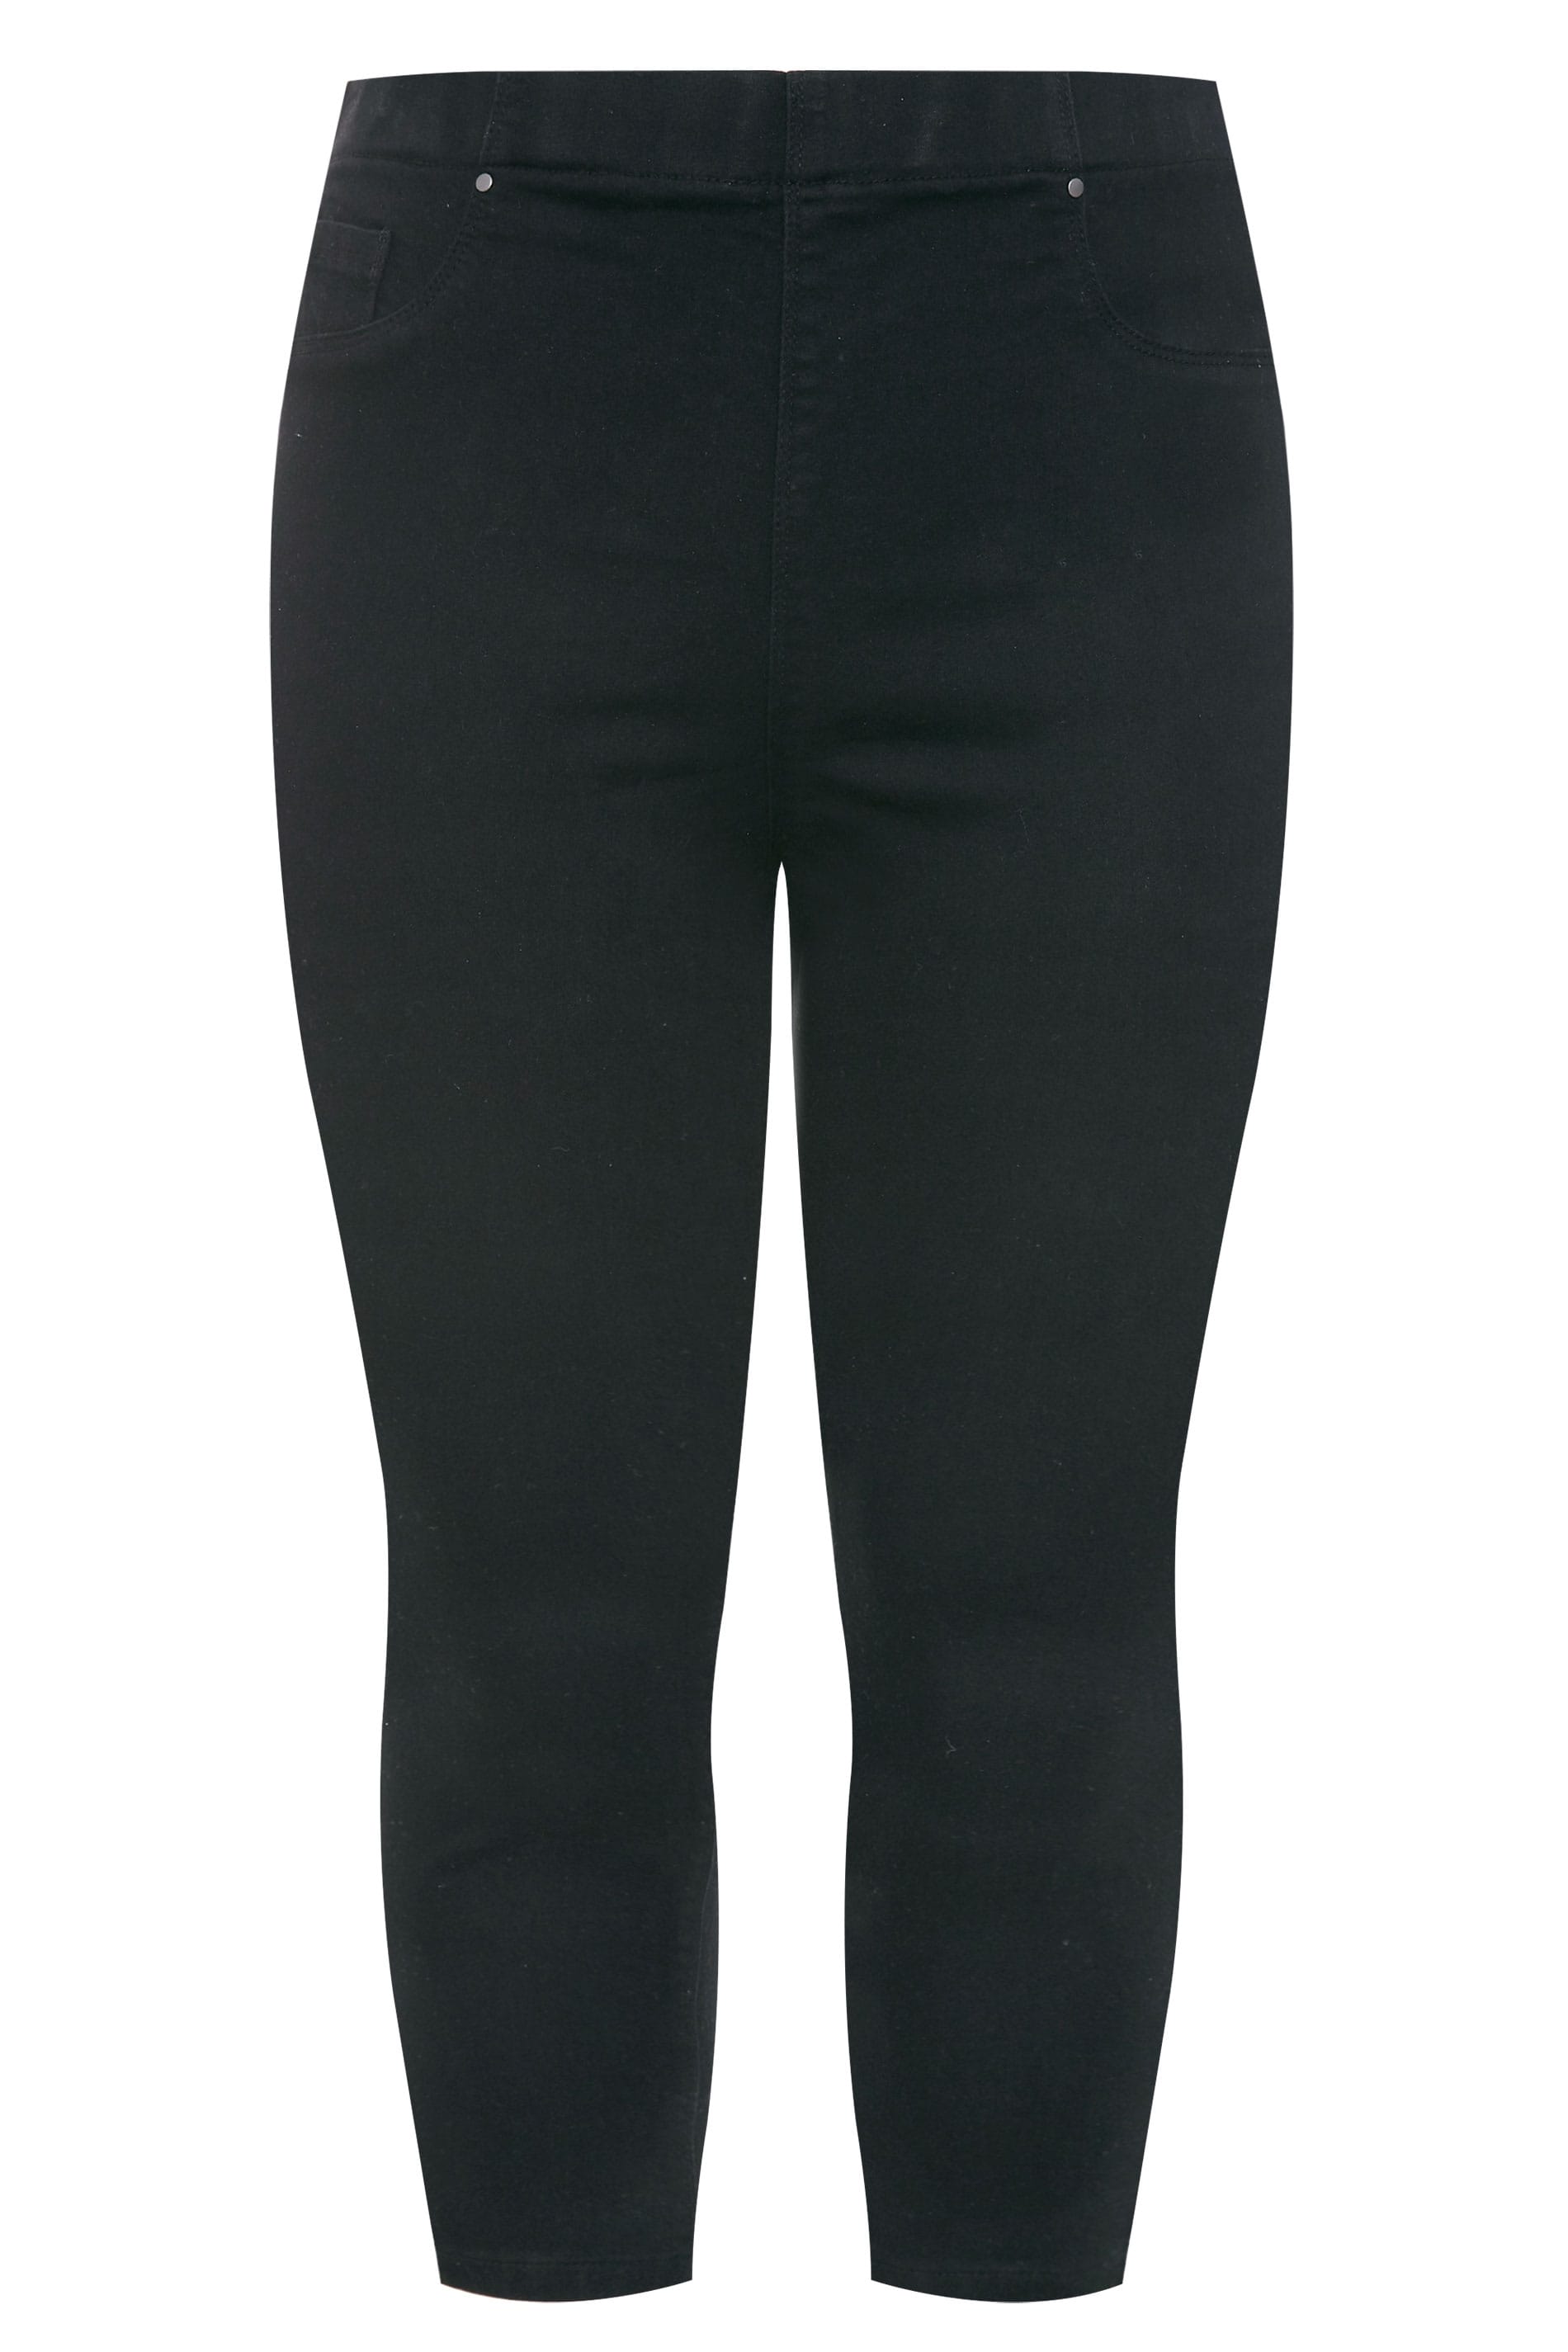 Black Cropped JENNY Jeggings | Yours Clothing